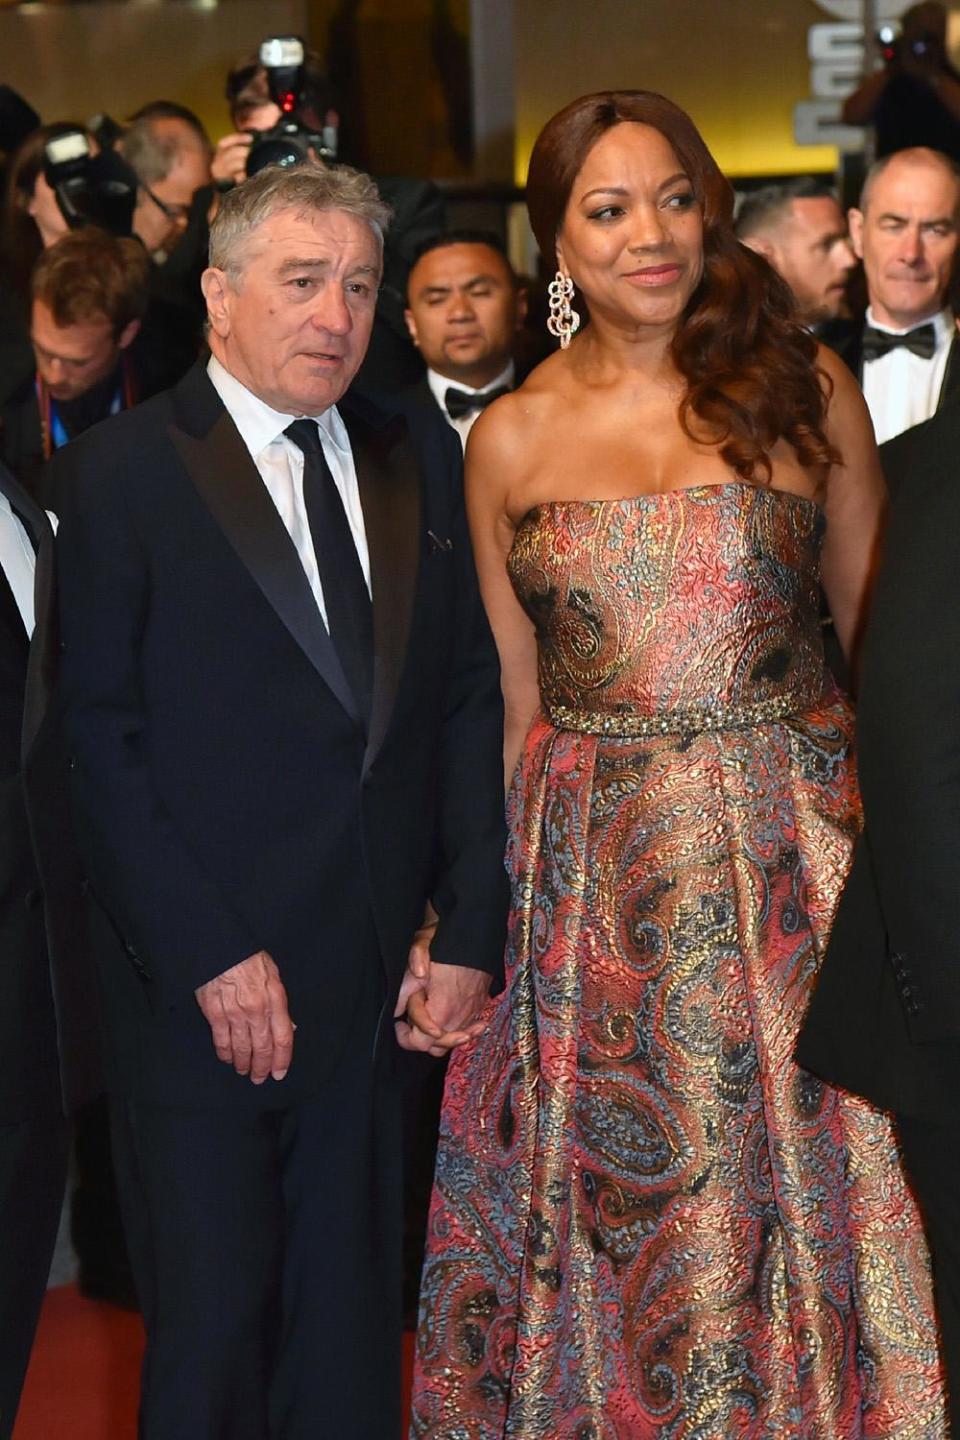 Speculation: Robert De Niro and Grace Hightower pictured at the Cannes Film Festival (Loic Venance/AFP/Getty )